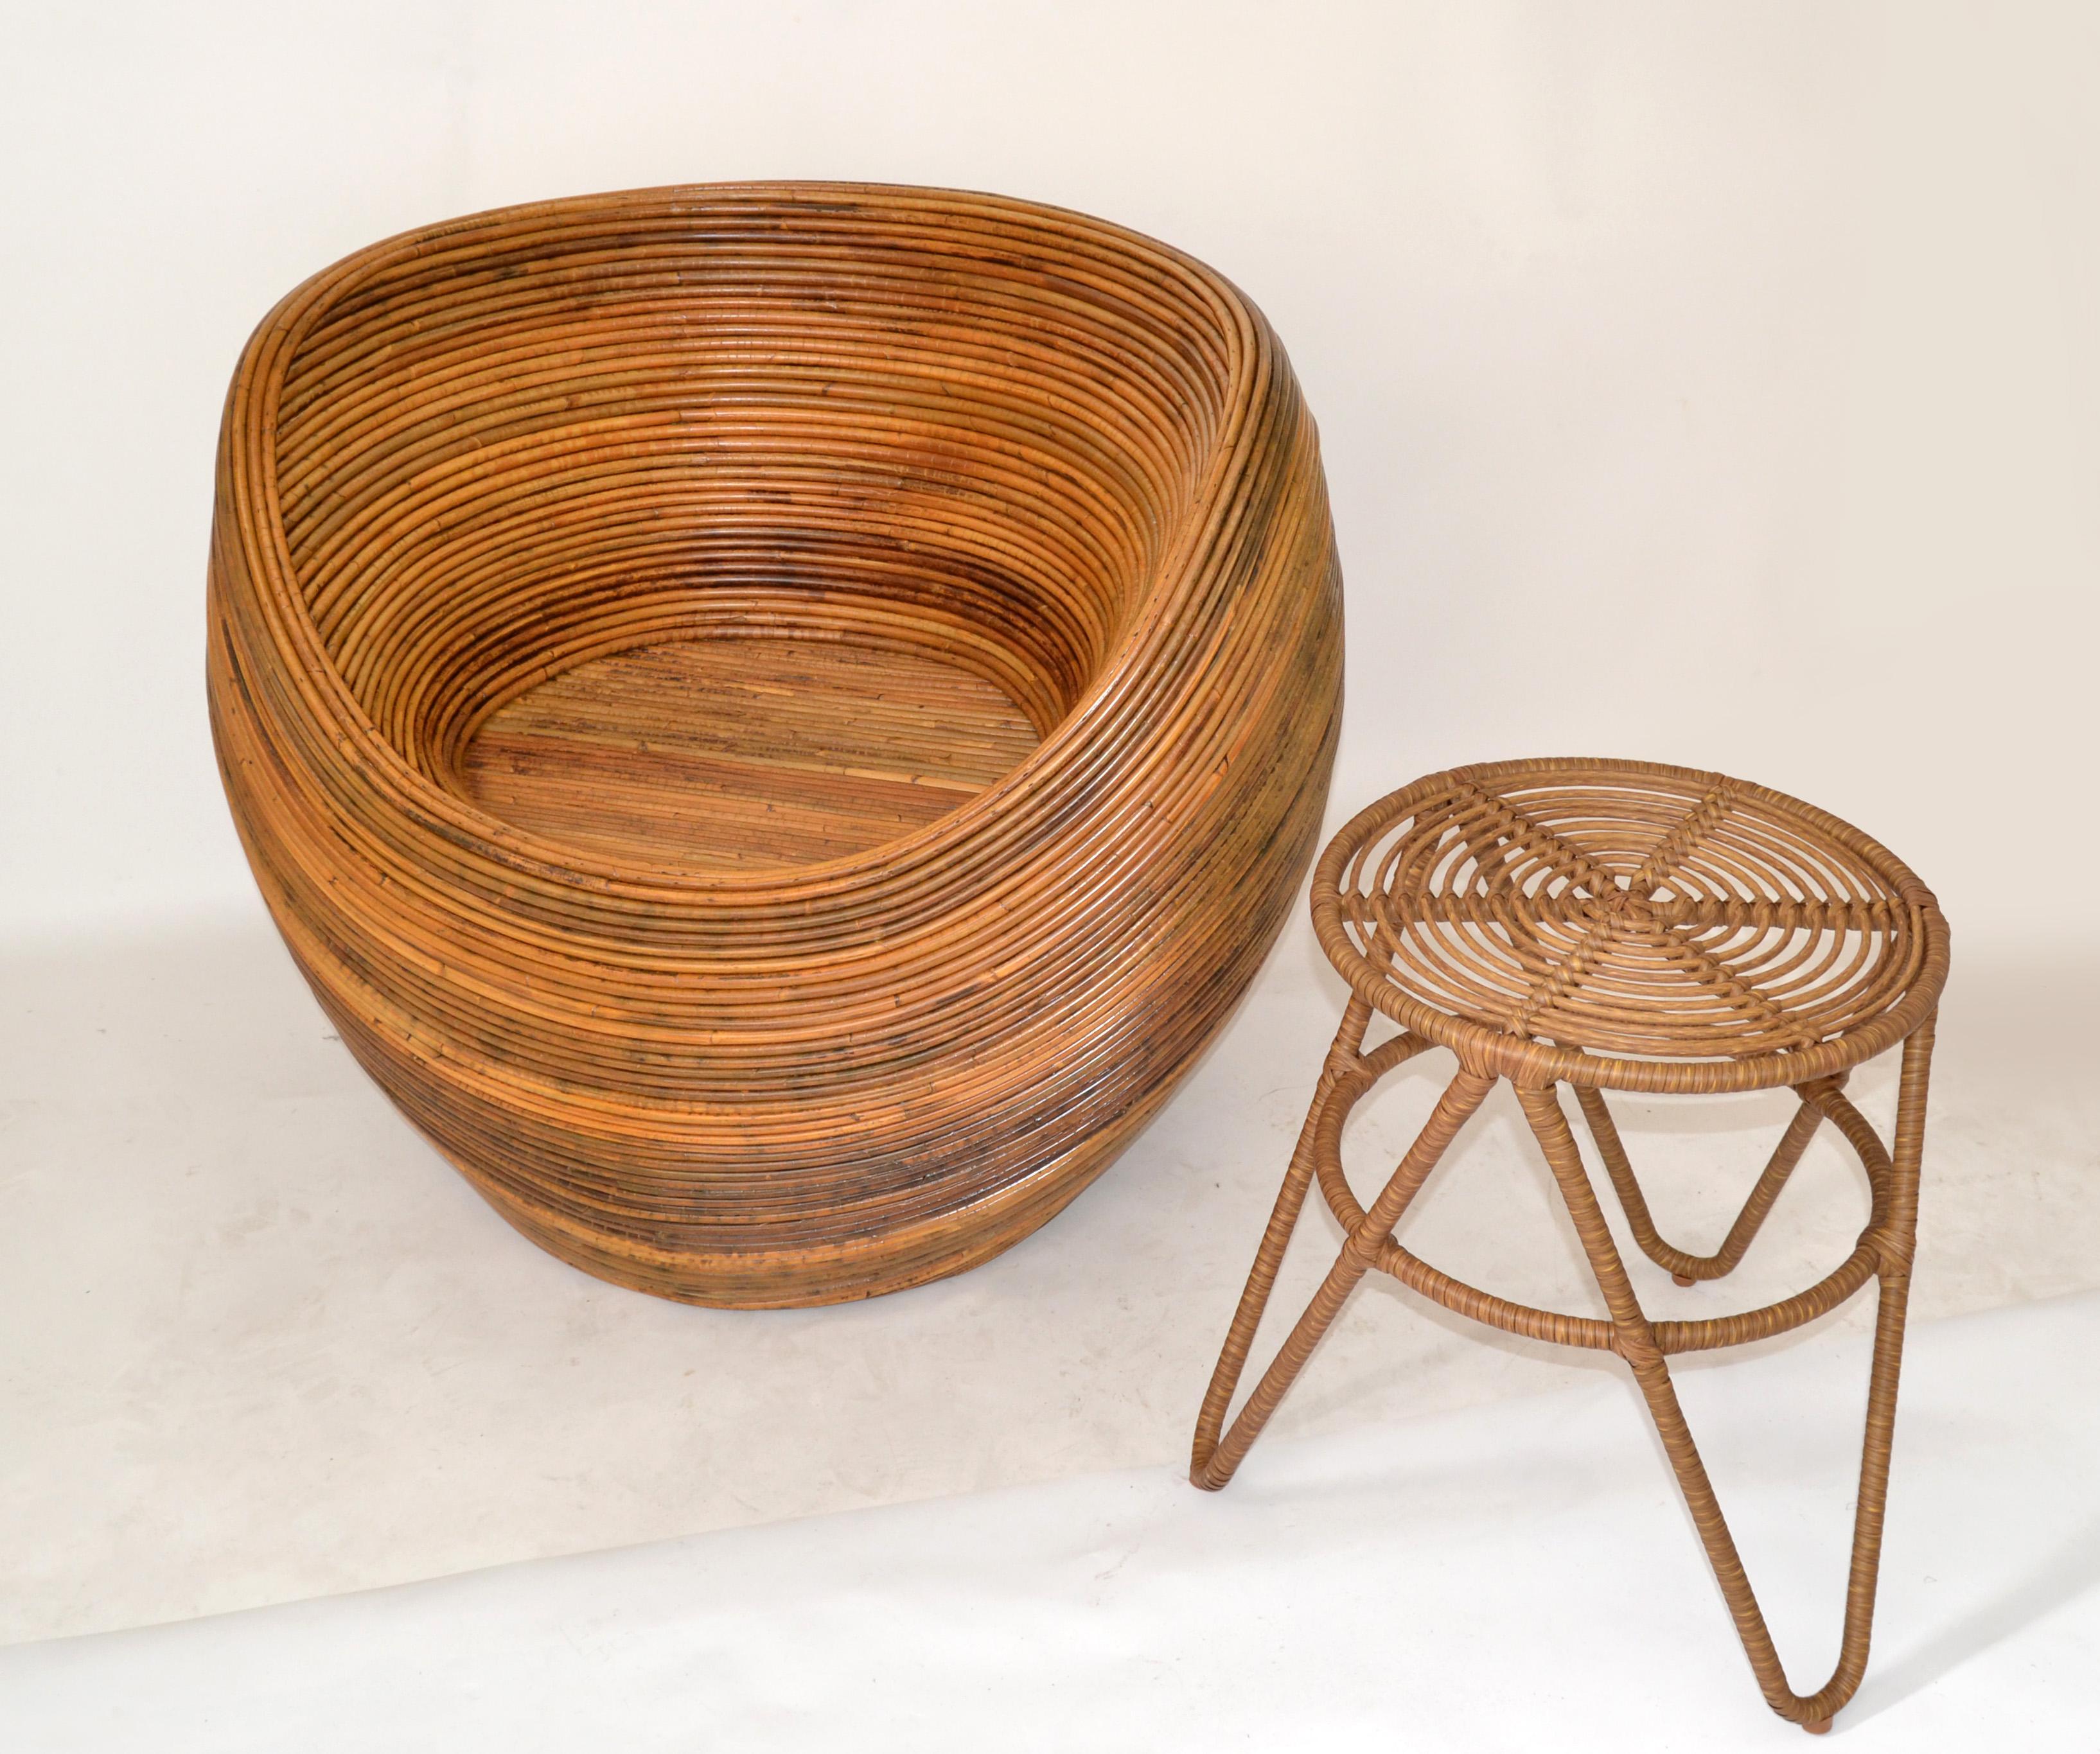 Fully Restored Sculptural Hand-Crafted Rattan Pod Tub Club Chair Bohemian Chic In Good Condition For Sale In Miami, FL